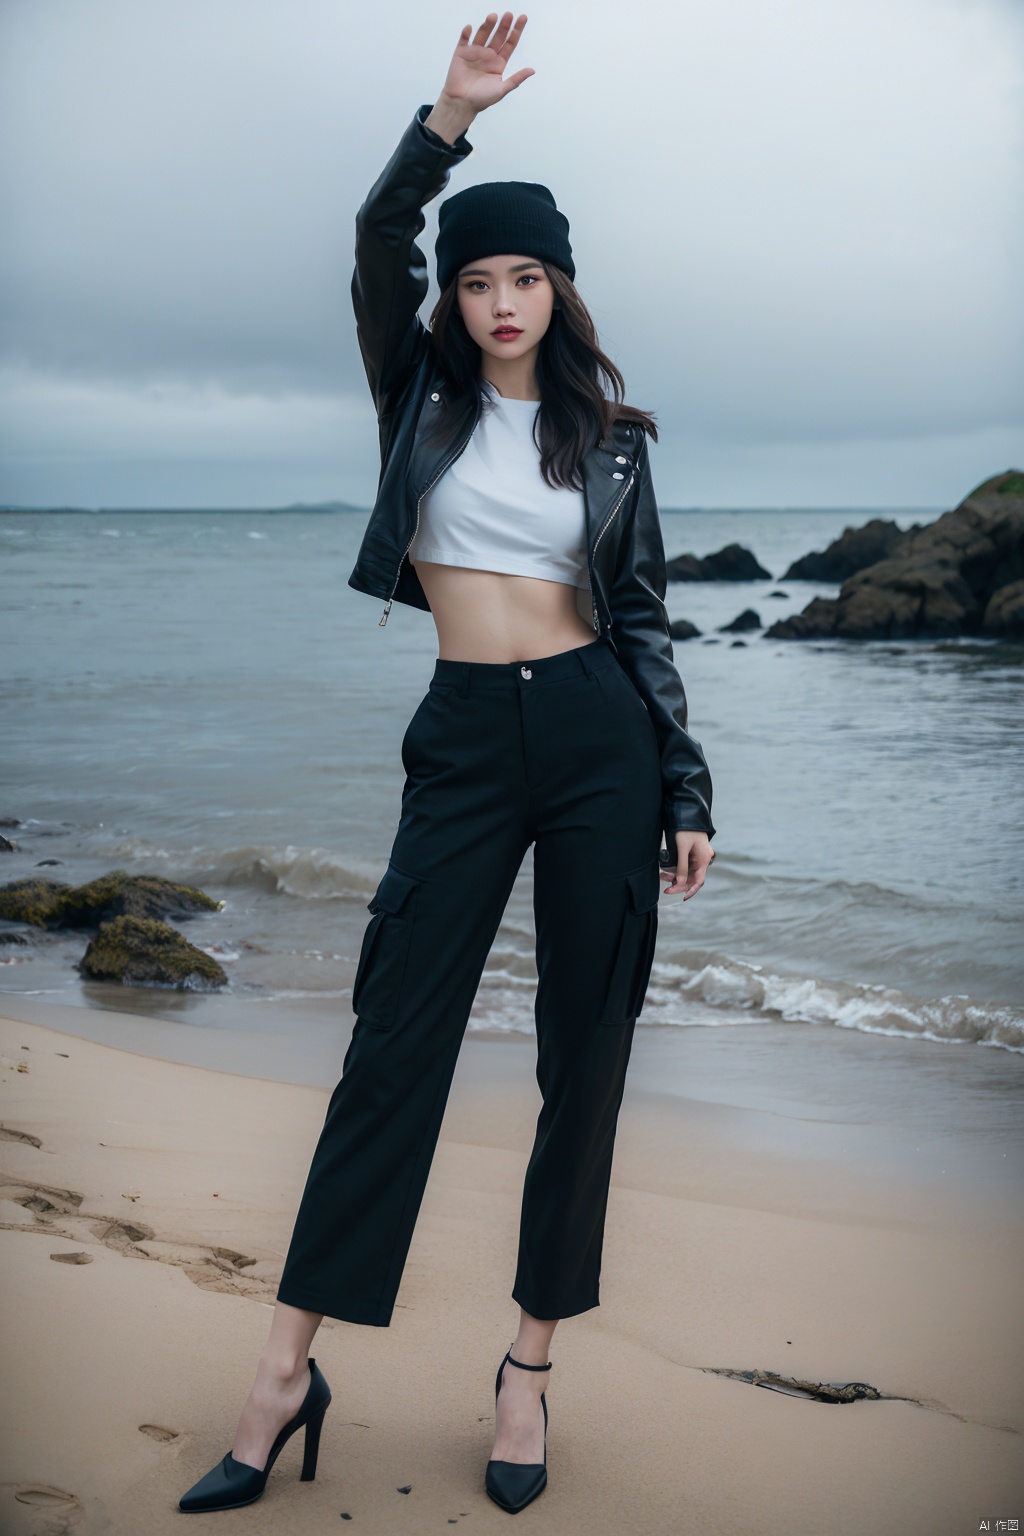 a young woman stands at the center, extending her arms wide against a vast, overcast seascape. She is positioned on a stony beach, where dark, smooth pebbles cover the ground. The ocean is calm with gentle waves lapping at the shore. Her attire is stylishly casual, with a street fashion vibeâshe sports a fitted grey crop top and voluminous black cargo pants, paired with a studded black leather jacket that adds a touch of rebellious flair. A black beanie caps her long hair that falls partially across her face, and she holds a black designer tote bag in her outstretched hand. Her posture exudes a sense of freedom and joy, embodying a spontaneous moment captured against the moody backdrop of an overcast sky and the tranquil sea.